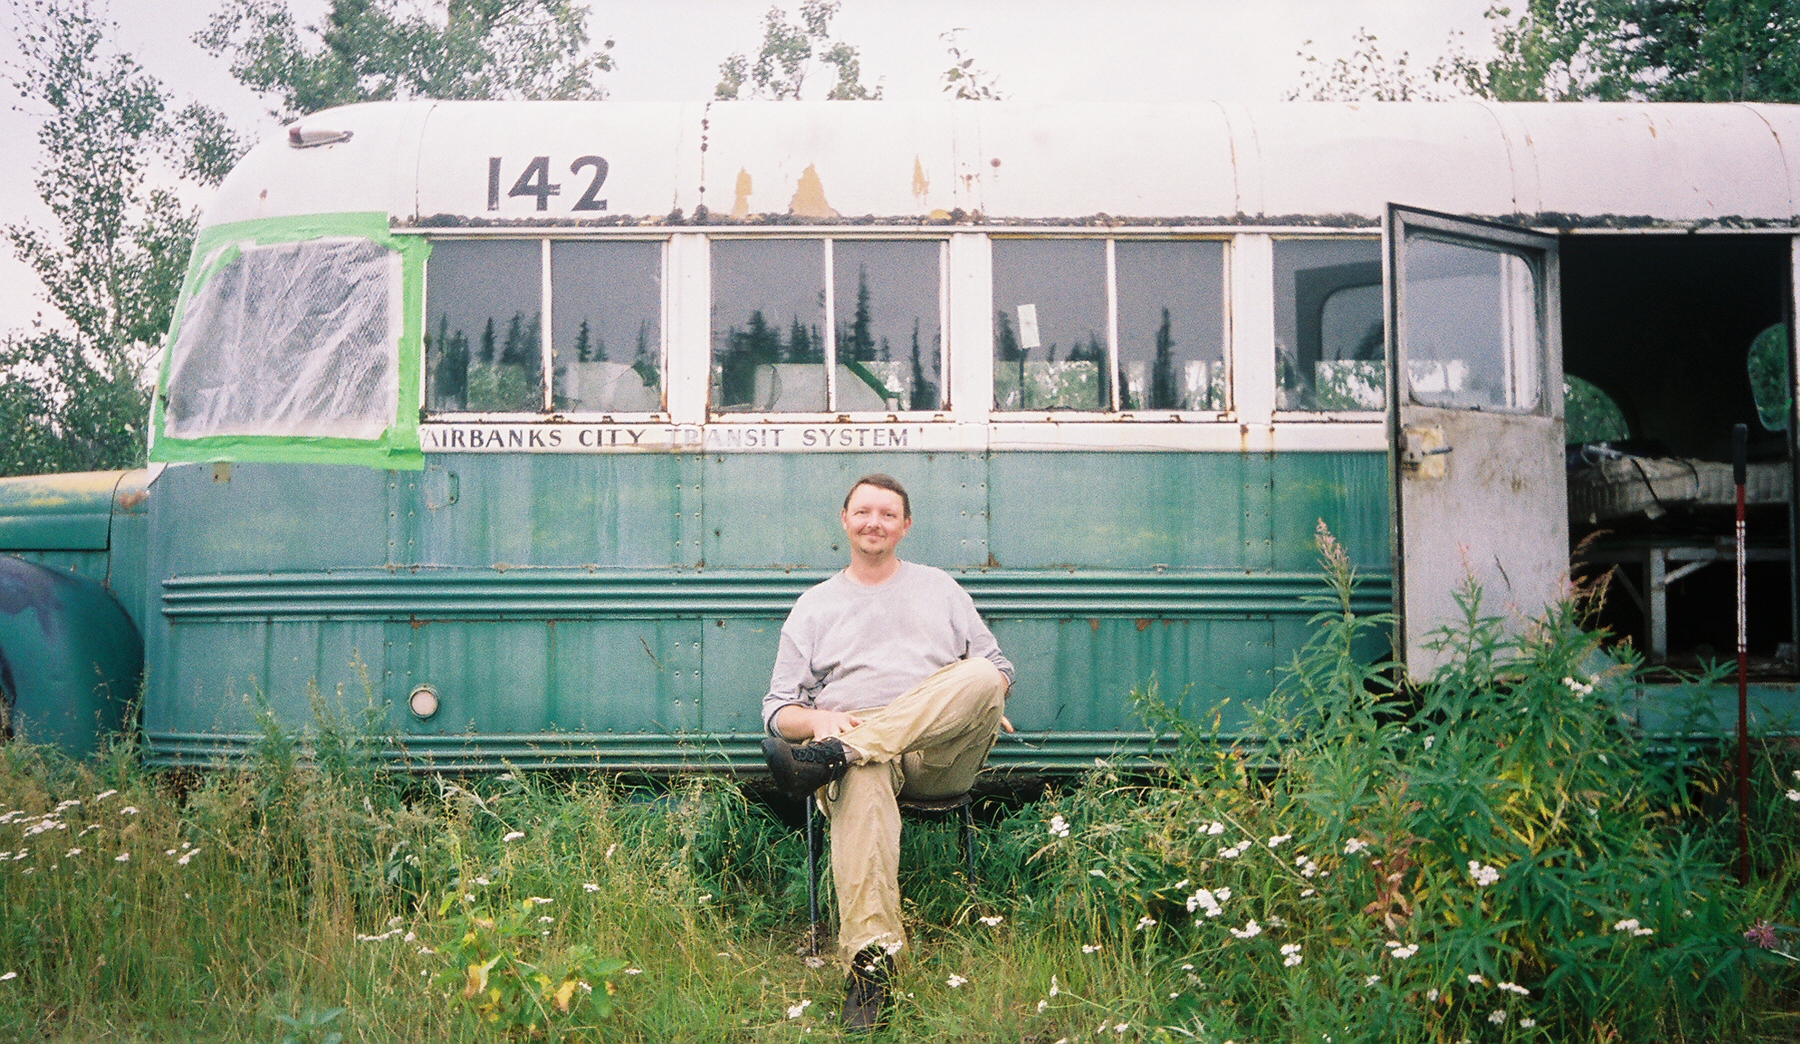 Jimmy Yaws at Bus 142 in August 2002